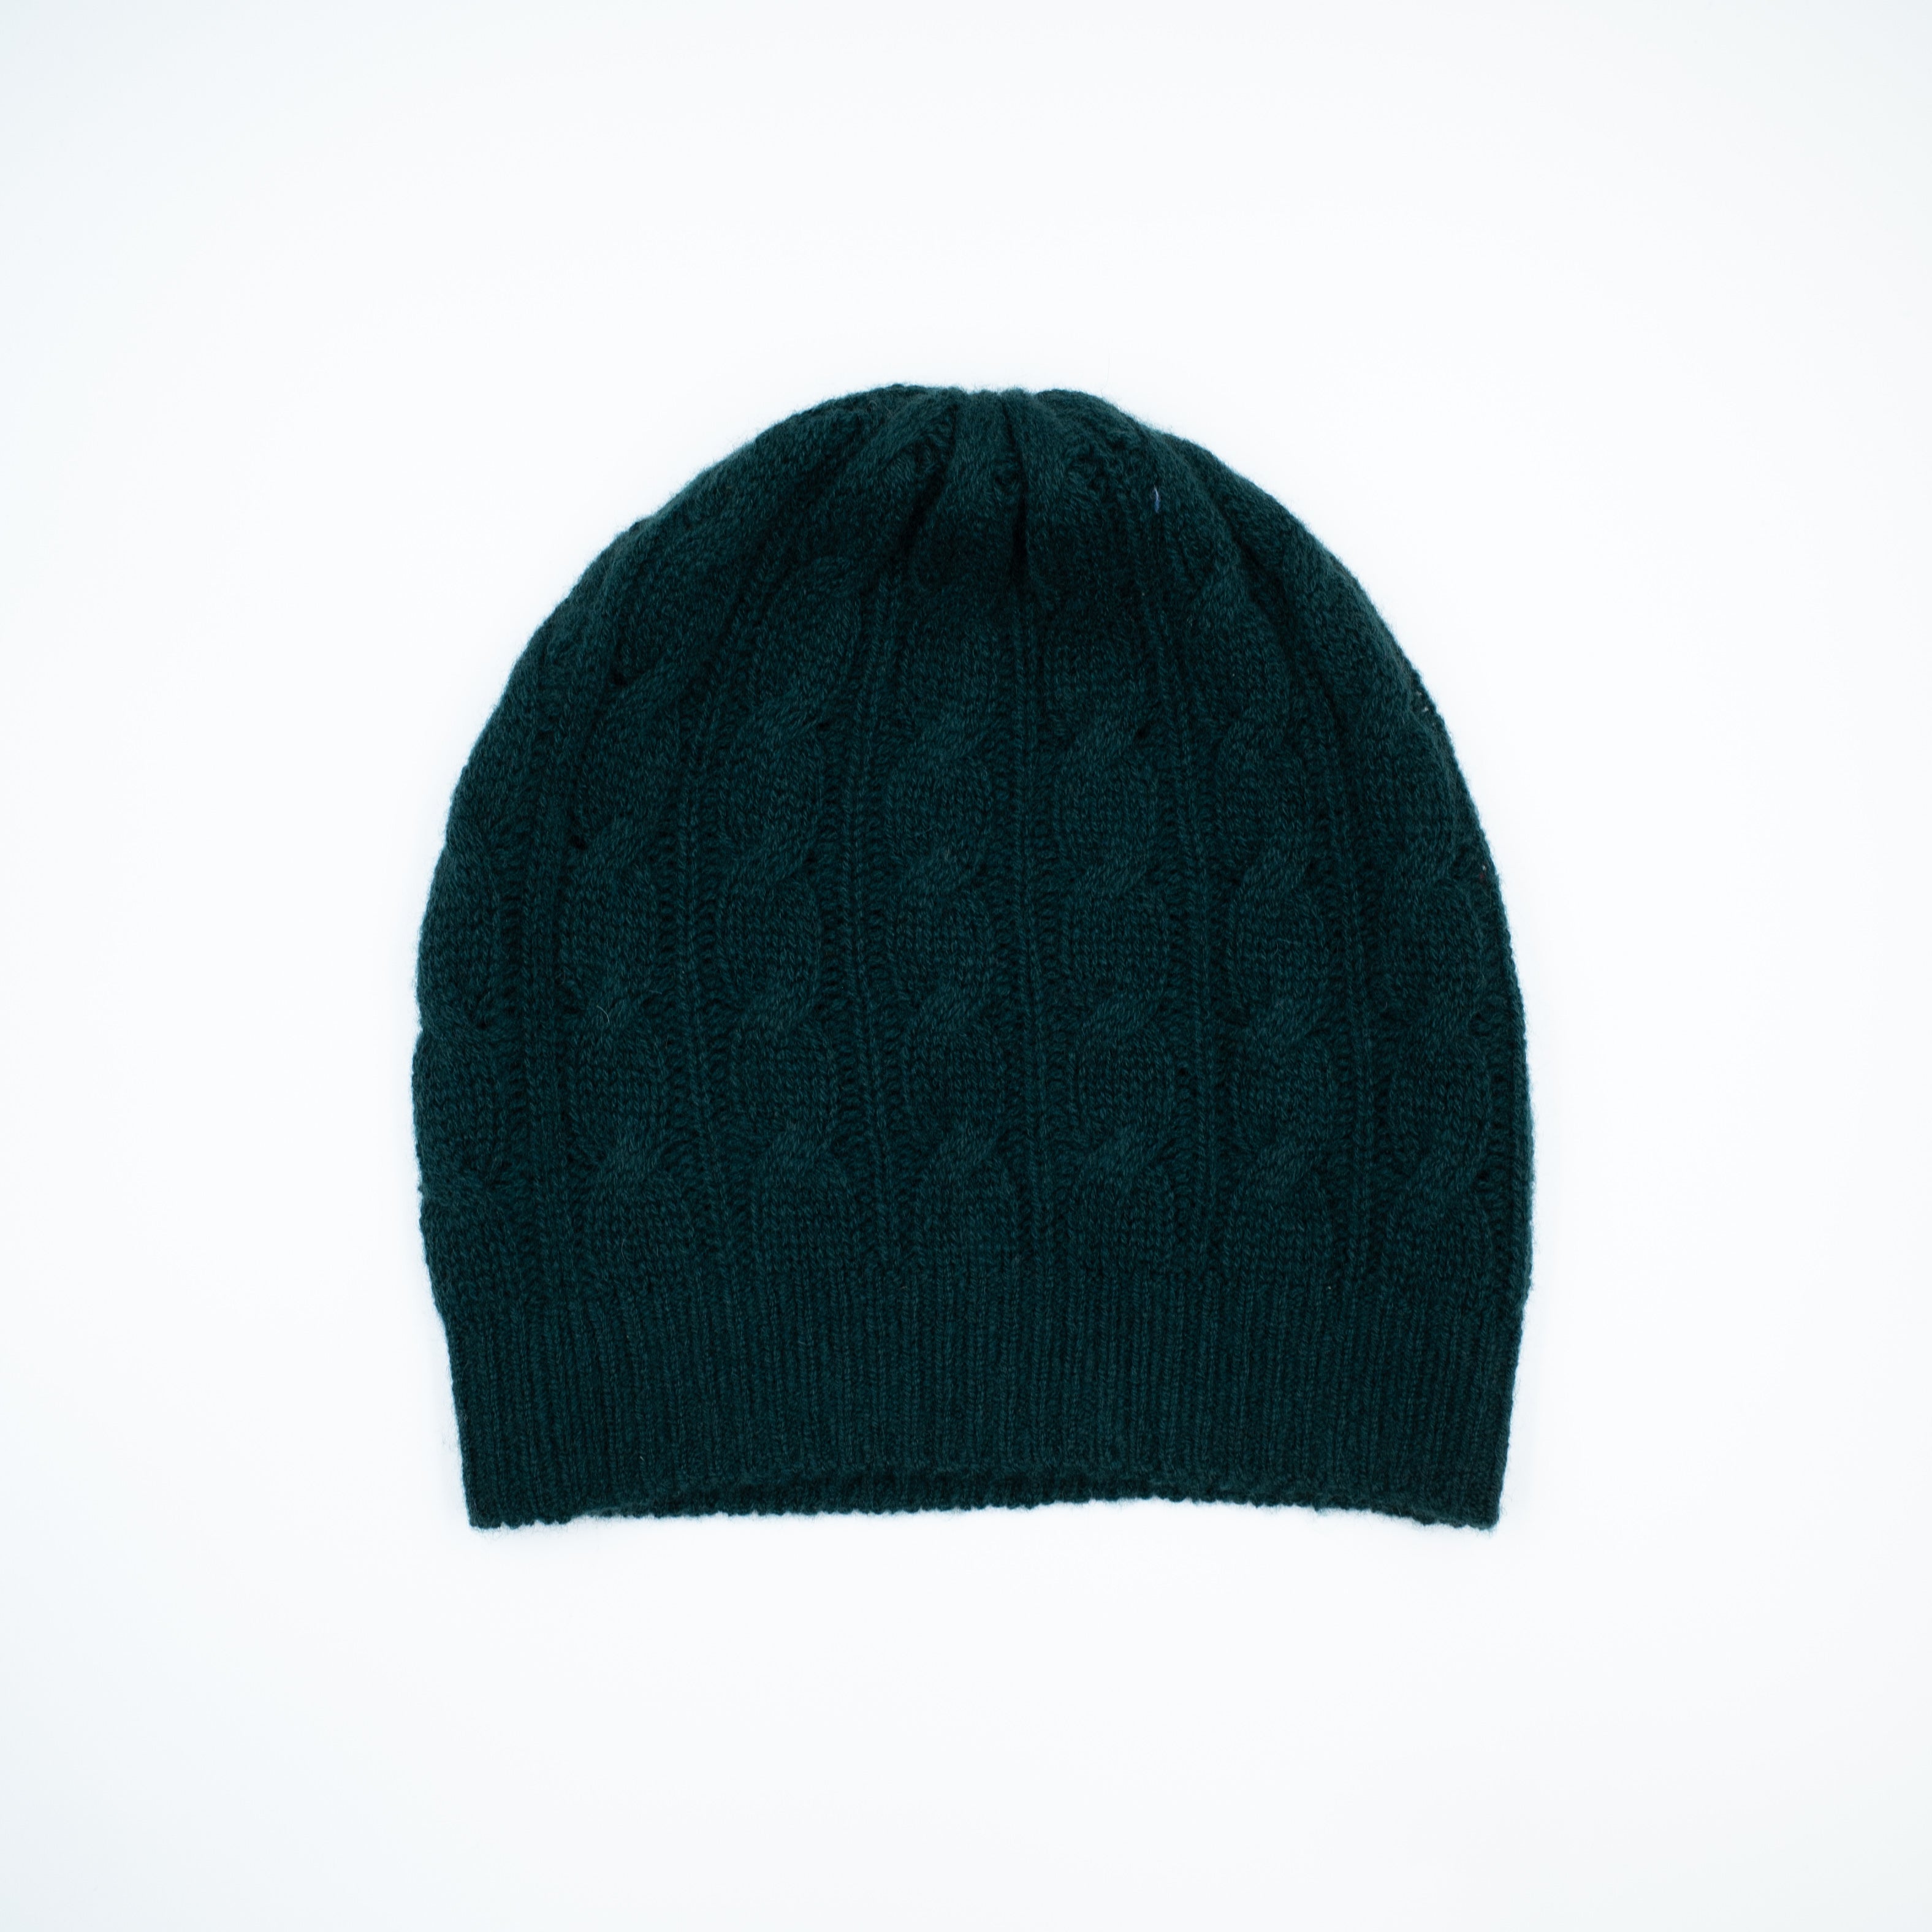 Brand New Scottish Forrest Green Cable Knit Beanie Hat Unisex